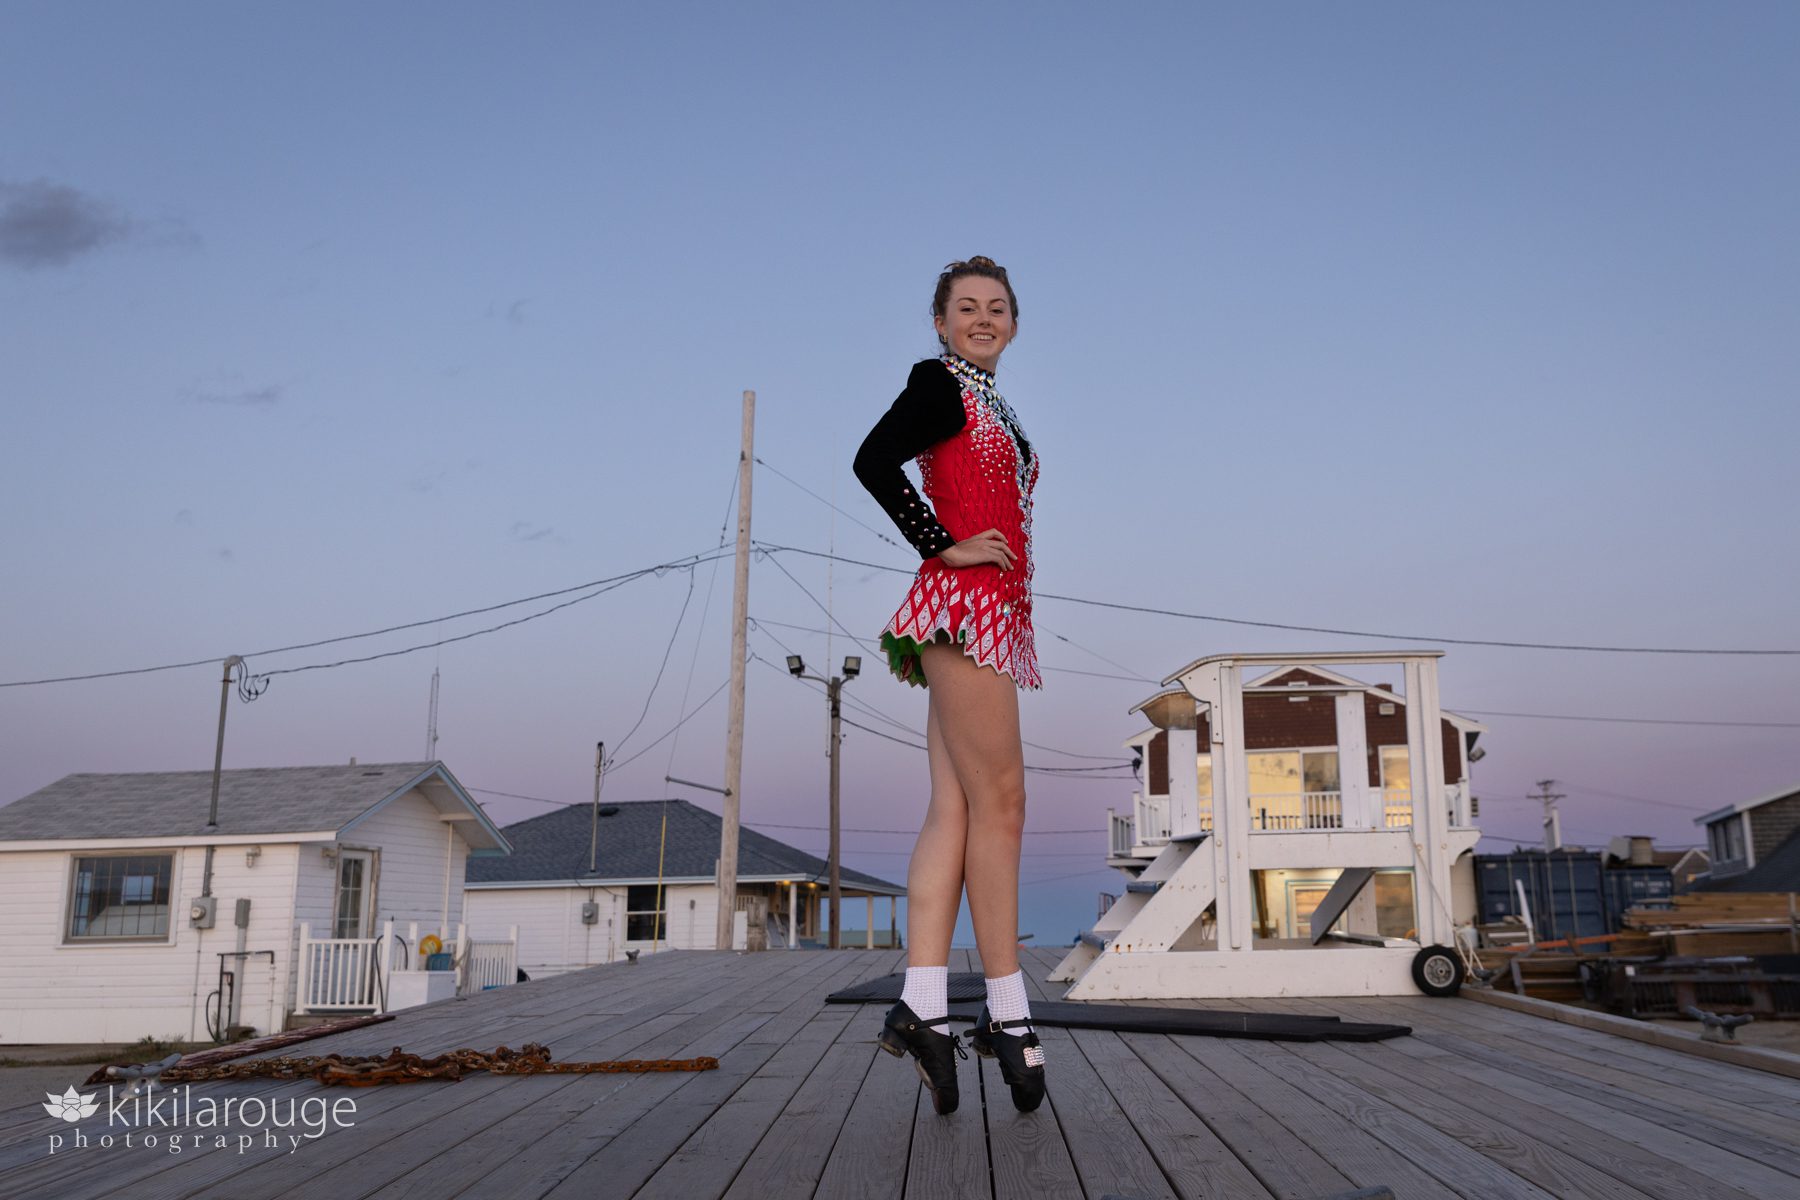 Girl in Irish Step Dancing dress and shoes on top of high platform at beach at sunset Plum Island